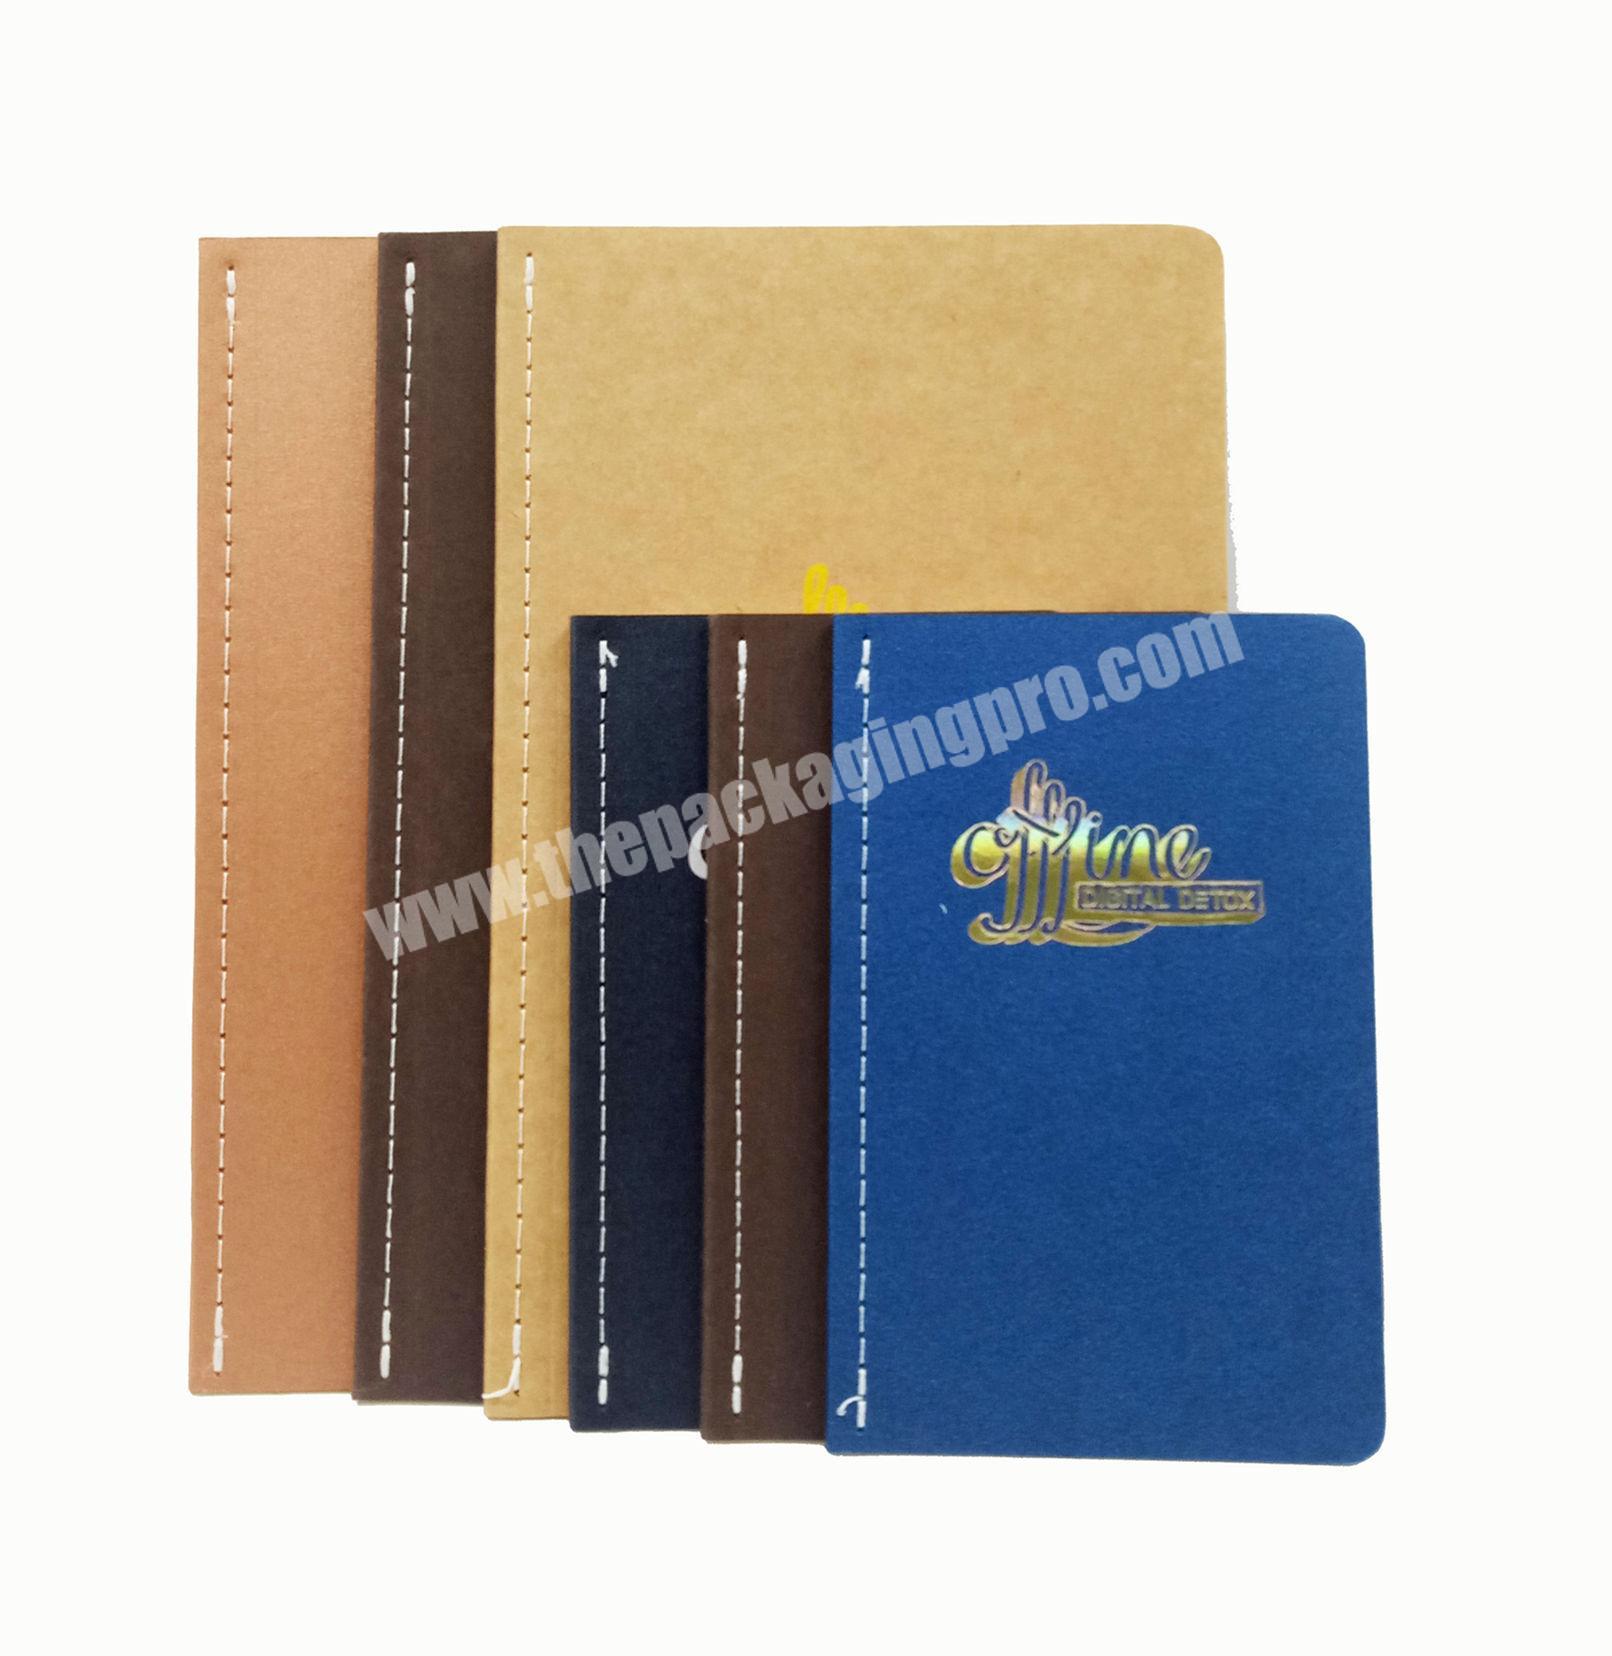 Top quality professional diary student journal composition notebook custom day planner